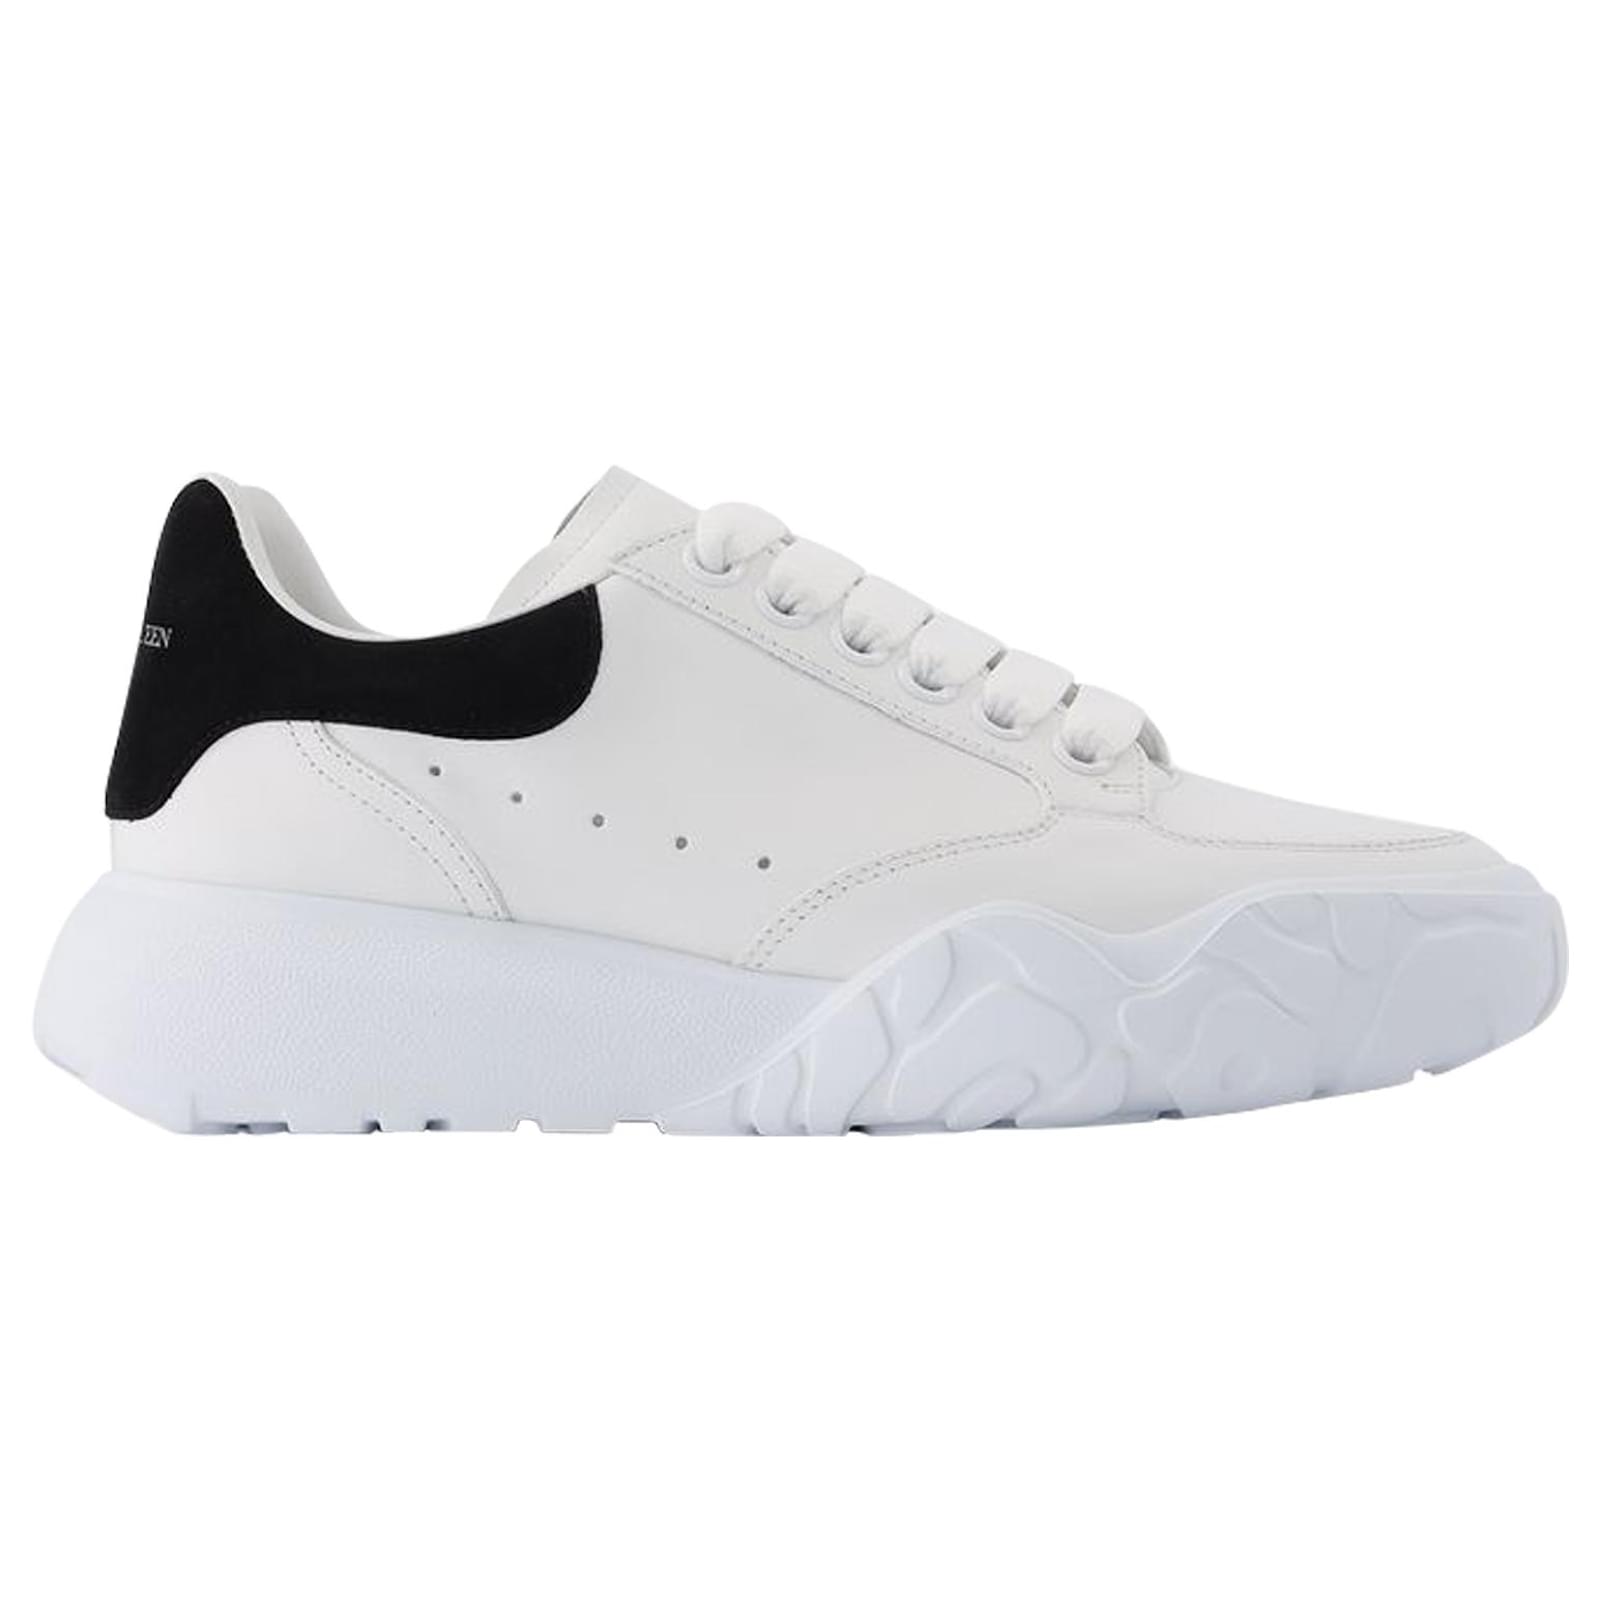 Alexander Mcqueen New Court Sneakers in Black and White Leather ...